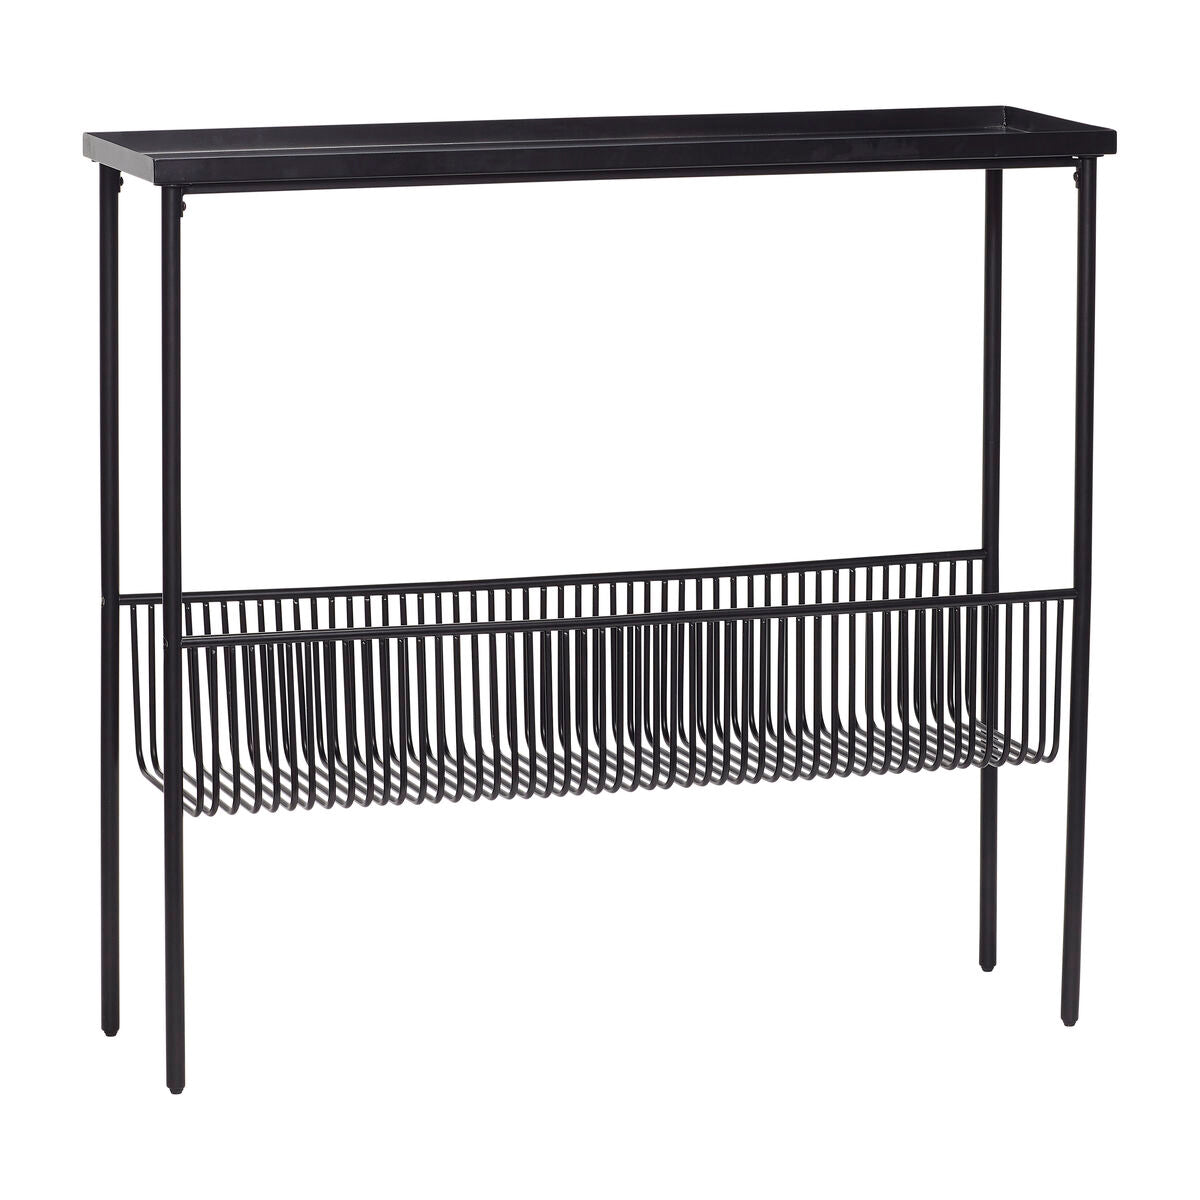 The Eyrie console is an original piece of furniture that will be a functional decoration of every home. Made entirely of black metal. Thanks to this, it gains a universal character, matching classic and currently designed interiors. It is distinguished by the lower, translucent shelf. It emphasizes not only the minimalist appearance, but also creates space for various items. From the place to storing trinkets in the hallway or bathroom, to the function of a dressing table or bedside table in the bedroom.